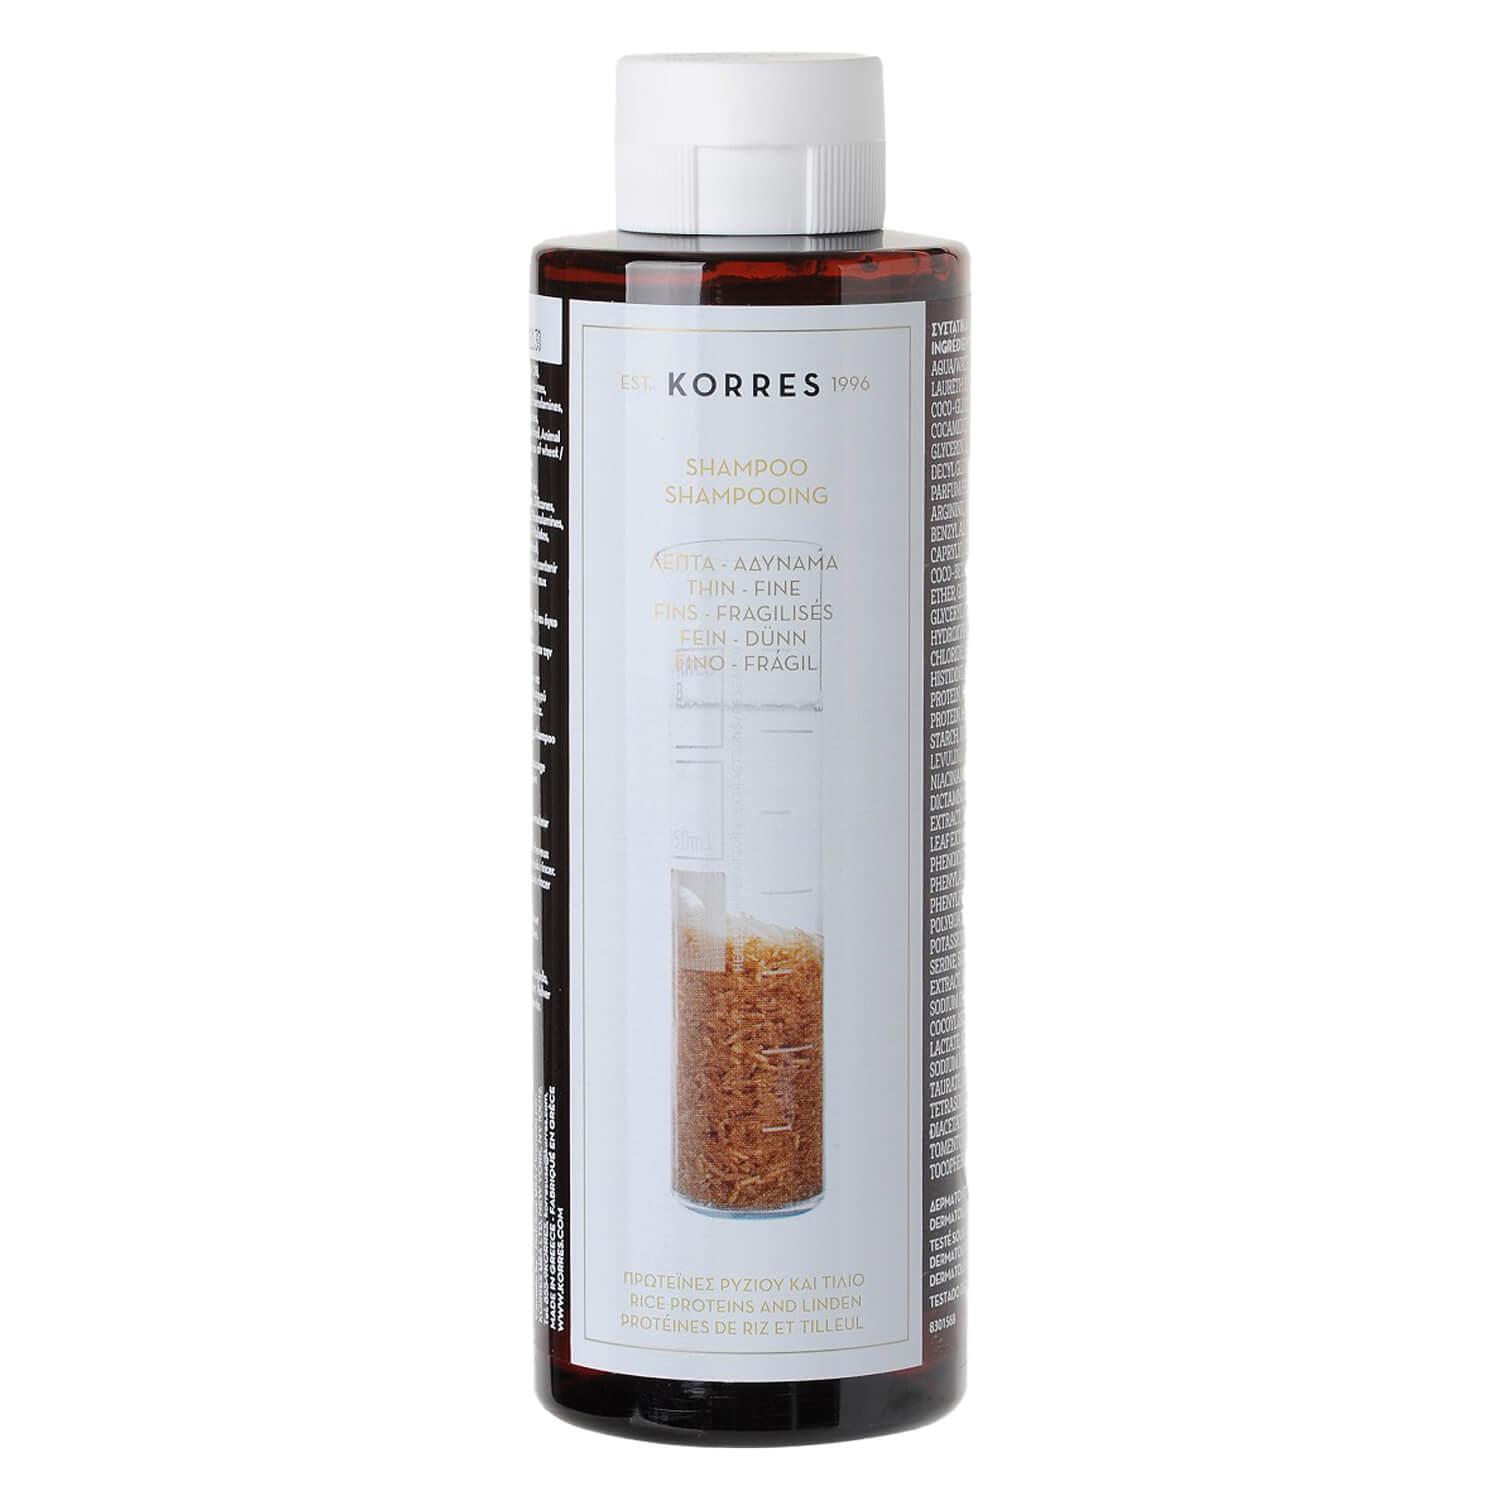 Korres Haircare - Rice Proteins & Linden Shampooing